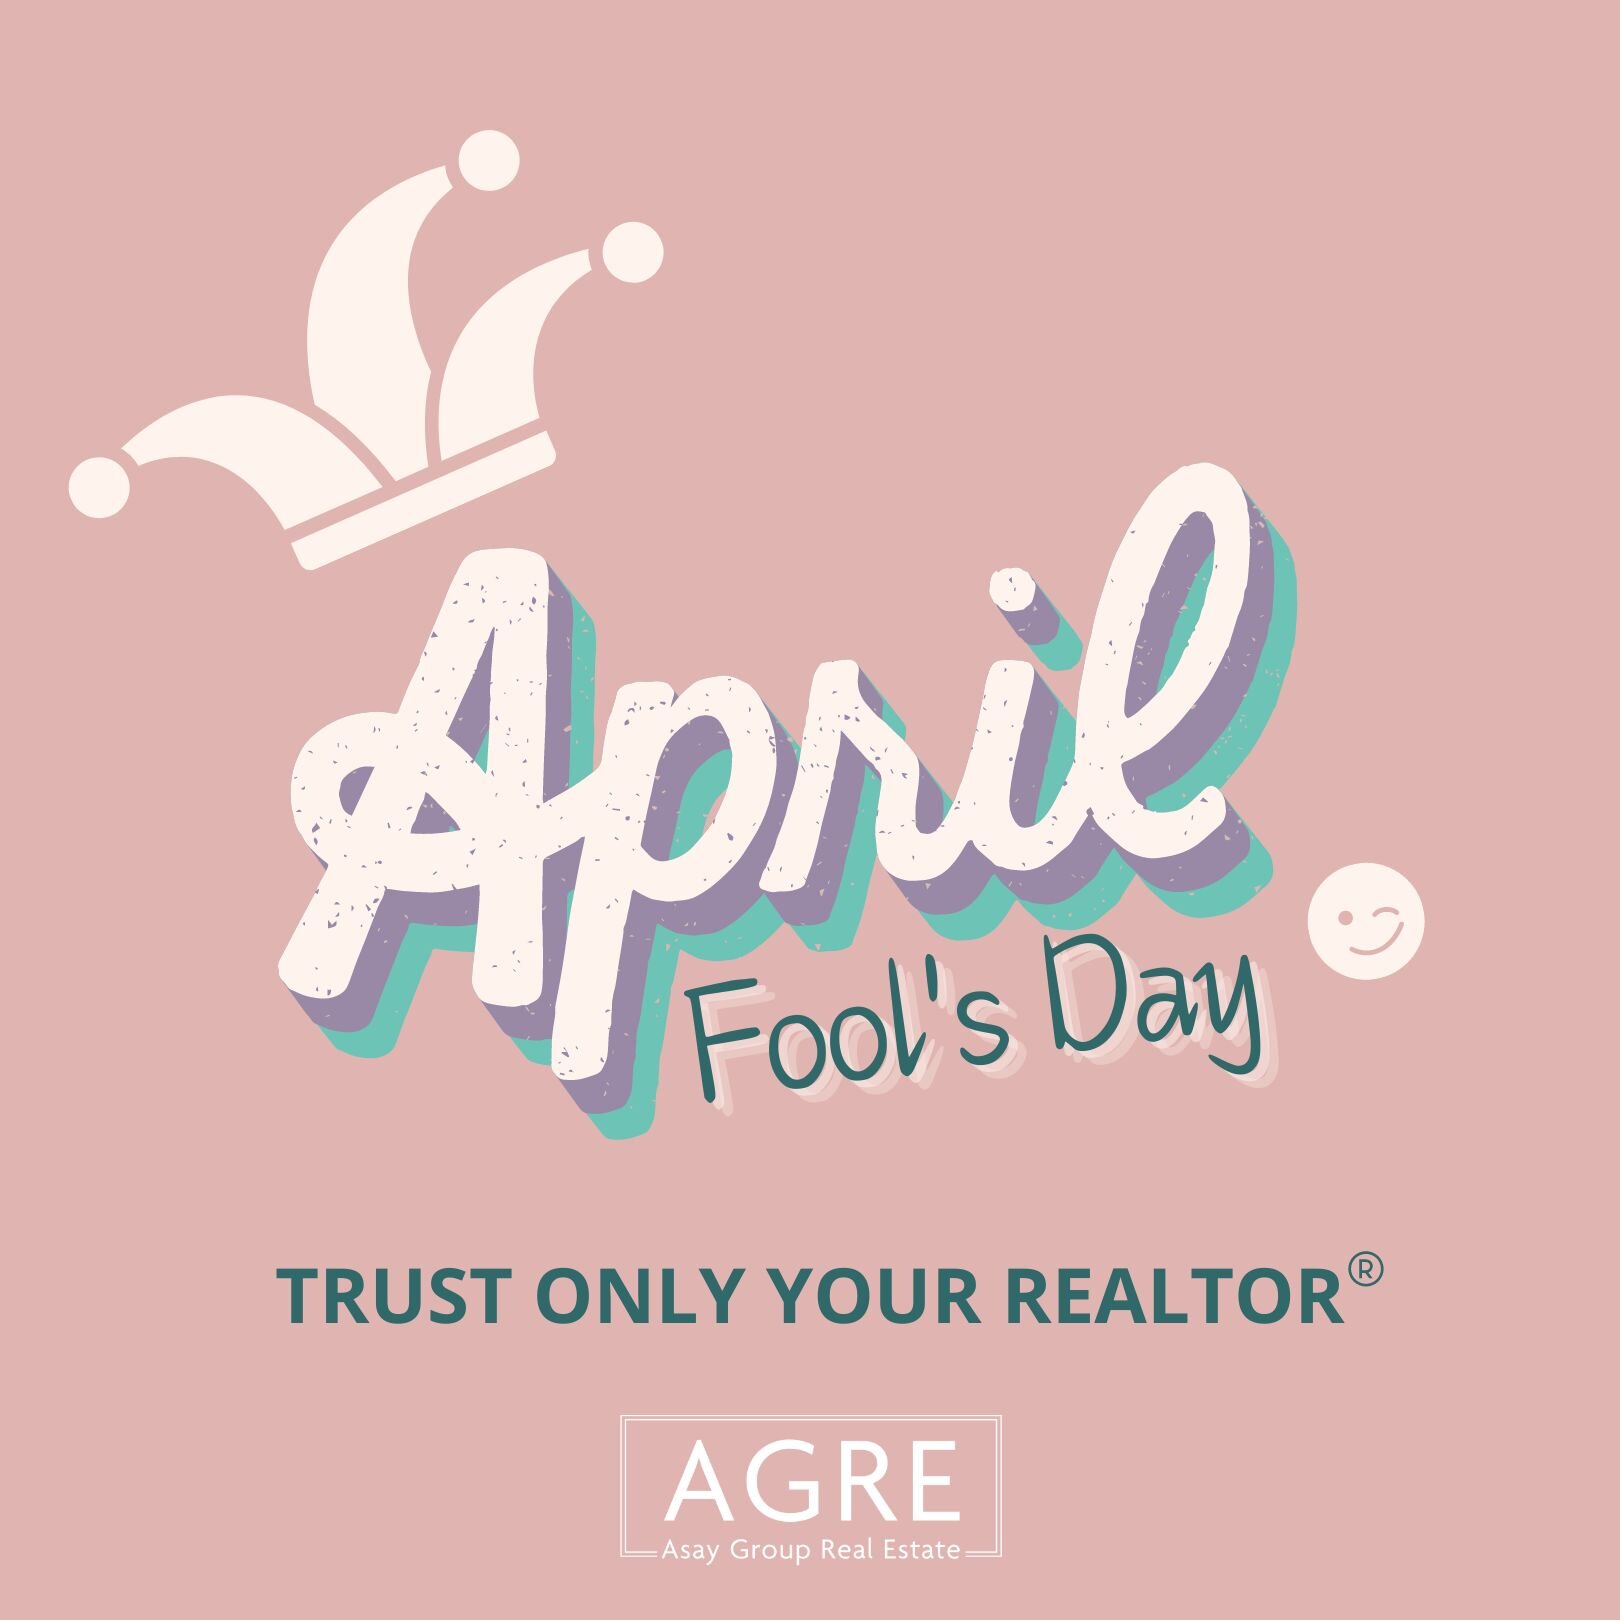 We love our clients too much to prank them. #TrustYourRealtor #aprilfools 

#agre #asaygrouprealestate #homeforsale #homesellertips #realestatetips #fortworth #thisisfortworth #kateasay #katesellsdfw #katesellsfortworth #funkytown #hometown #fortwort